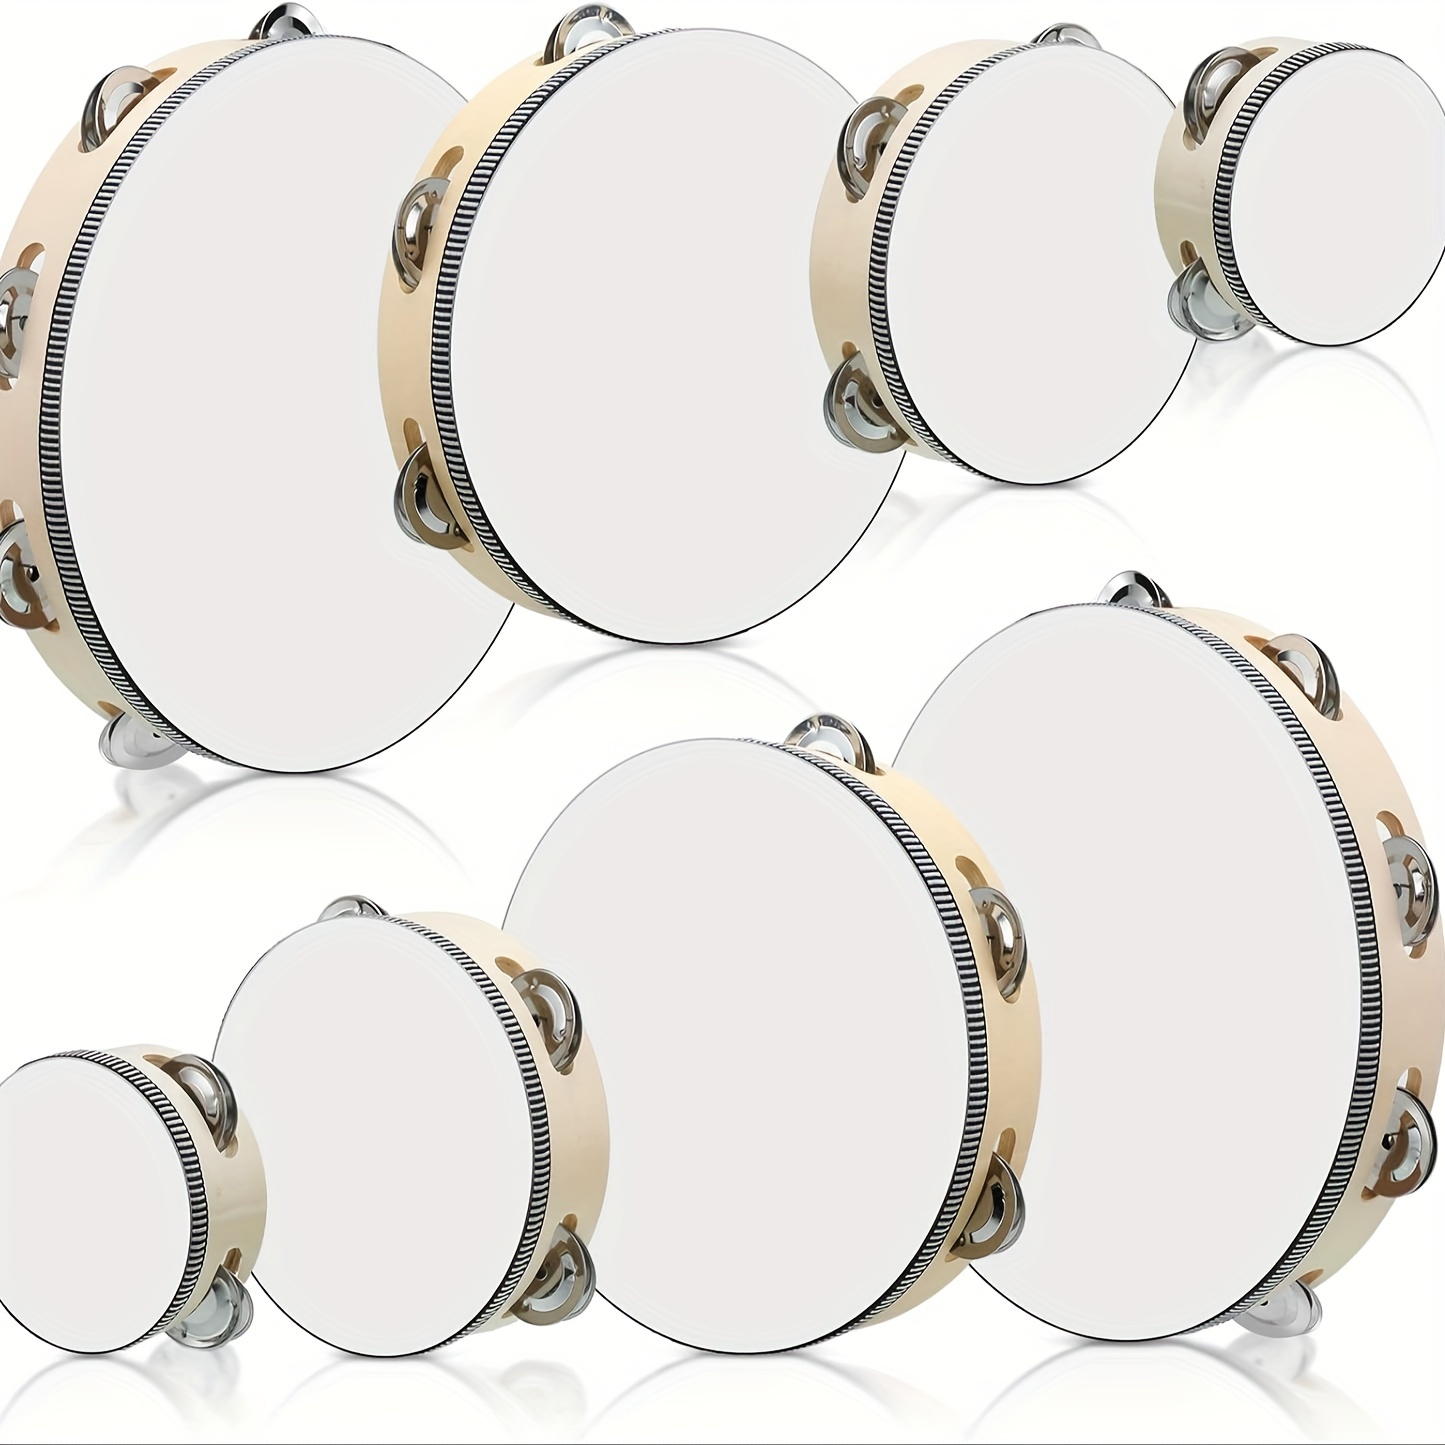 

1pc Tambourines For Adults, Wooden Hand Held Drum Bell Tambourine With Birch Metal Jingles Single Row Percussion Musical Instruments Hand Tambourine For Church, Ktv, Party, Game Eid Al-adha Mubarak